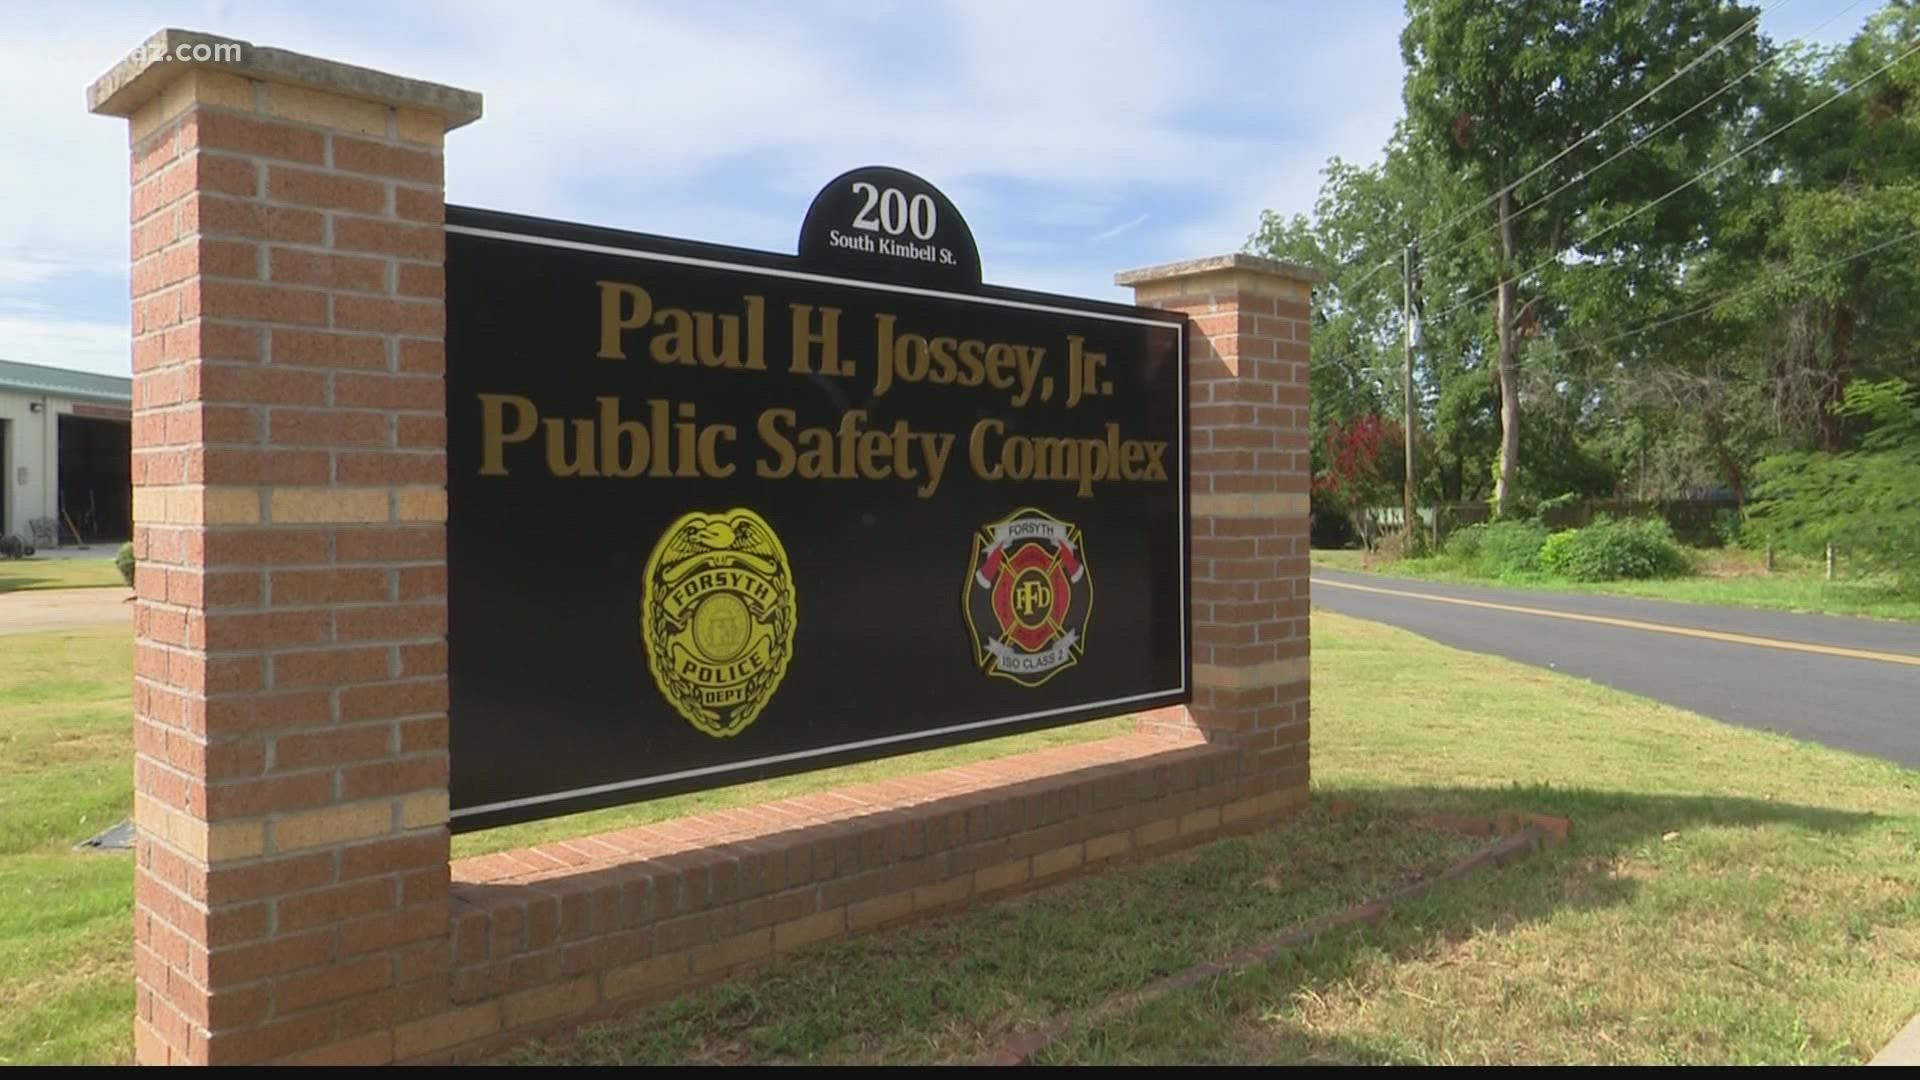 Forsyth Police Department are looking to hire new patrol officers and a new chief.